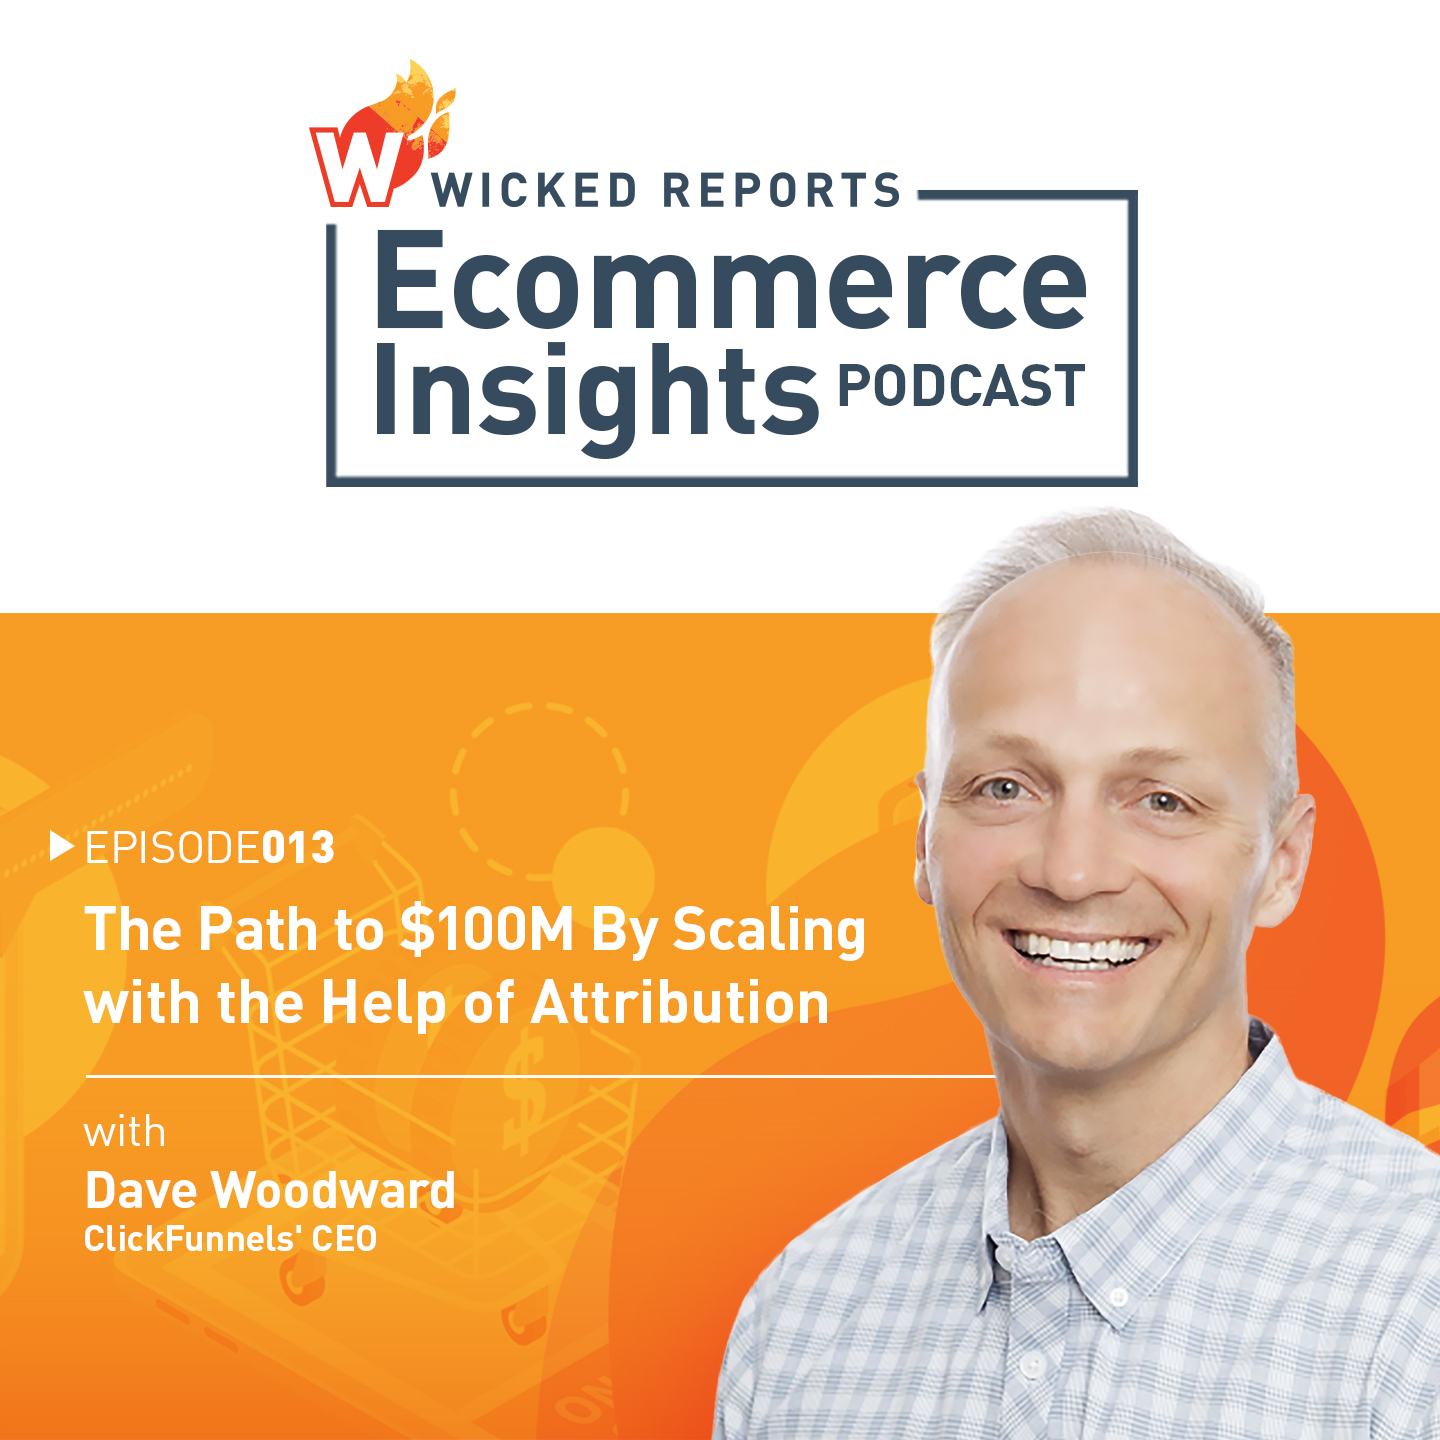 The Path to $100M By Scaling with the Help of Attribution with ClickFunnels' CEO Dave Woodward